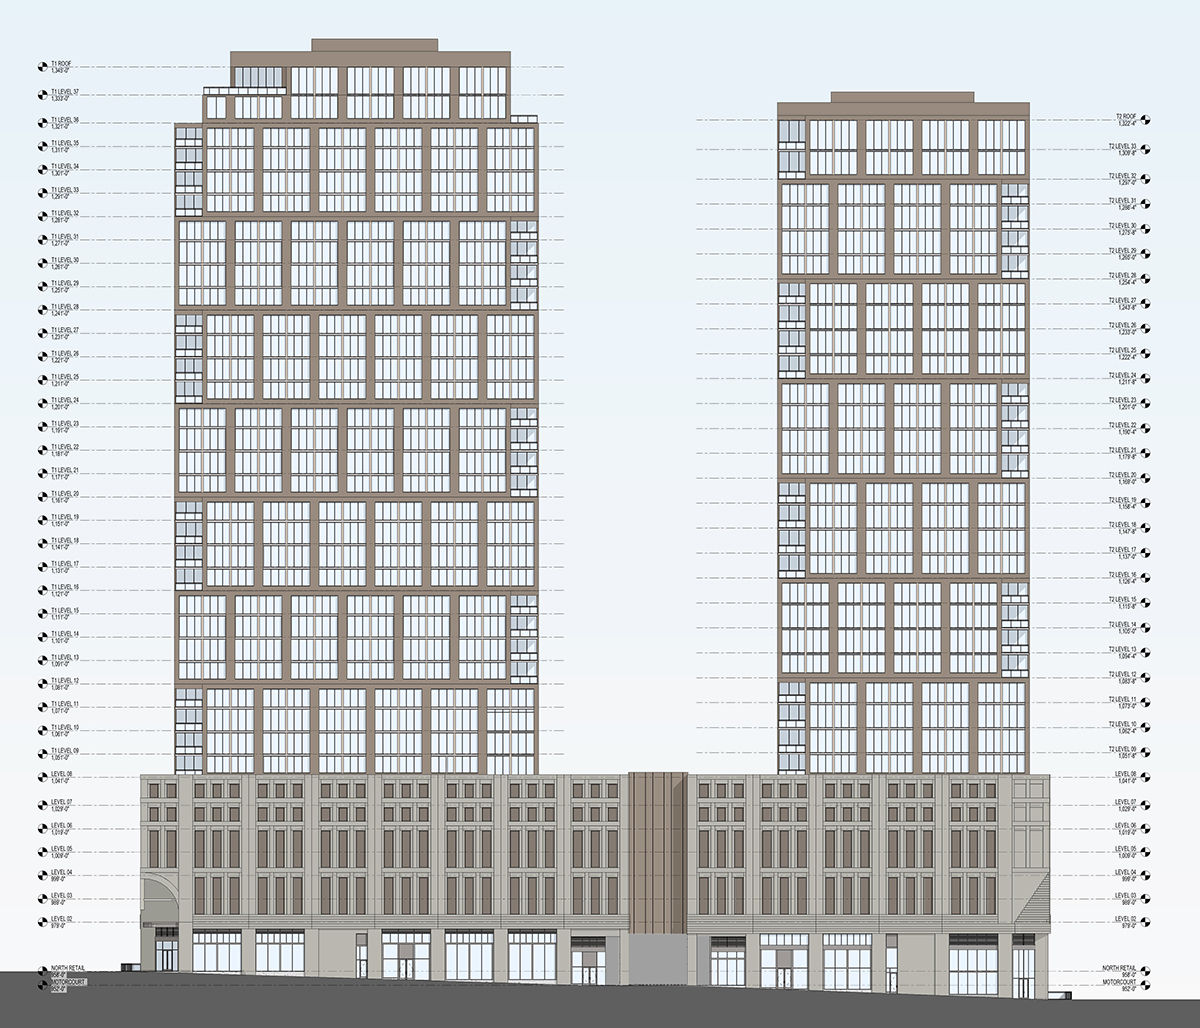 A sketch of the proposed 1081 Juniper Street project showing elevation of the towers along the east side of the street.